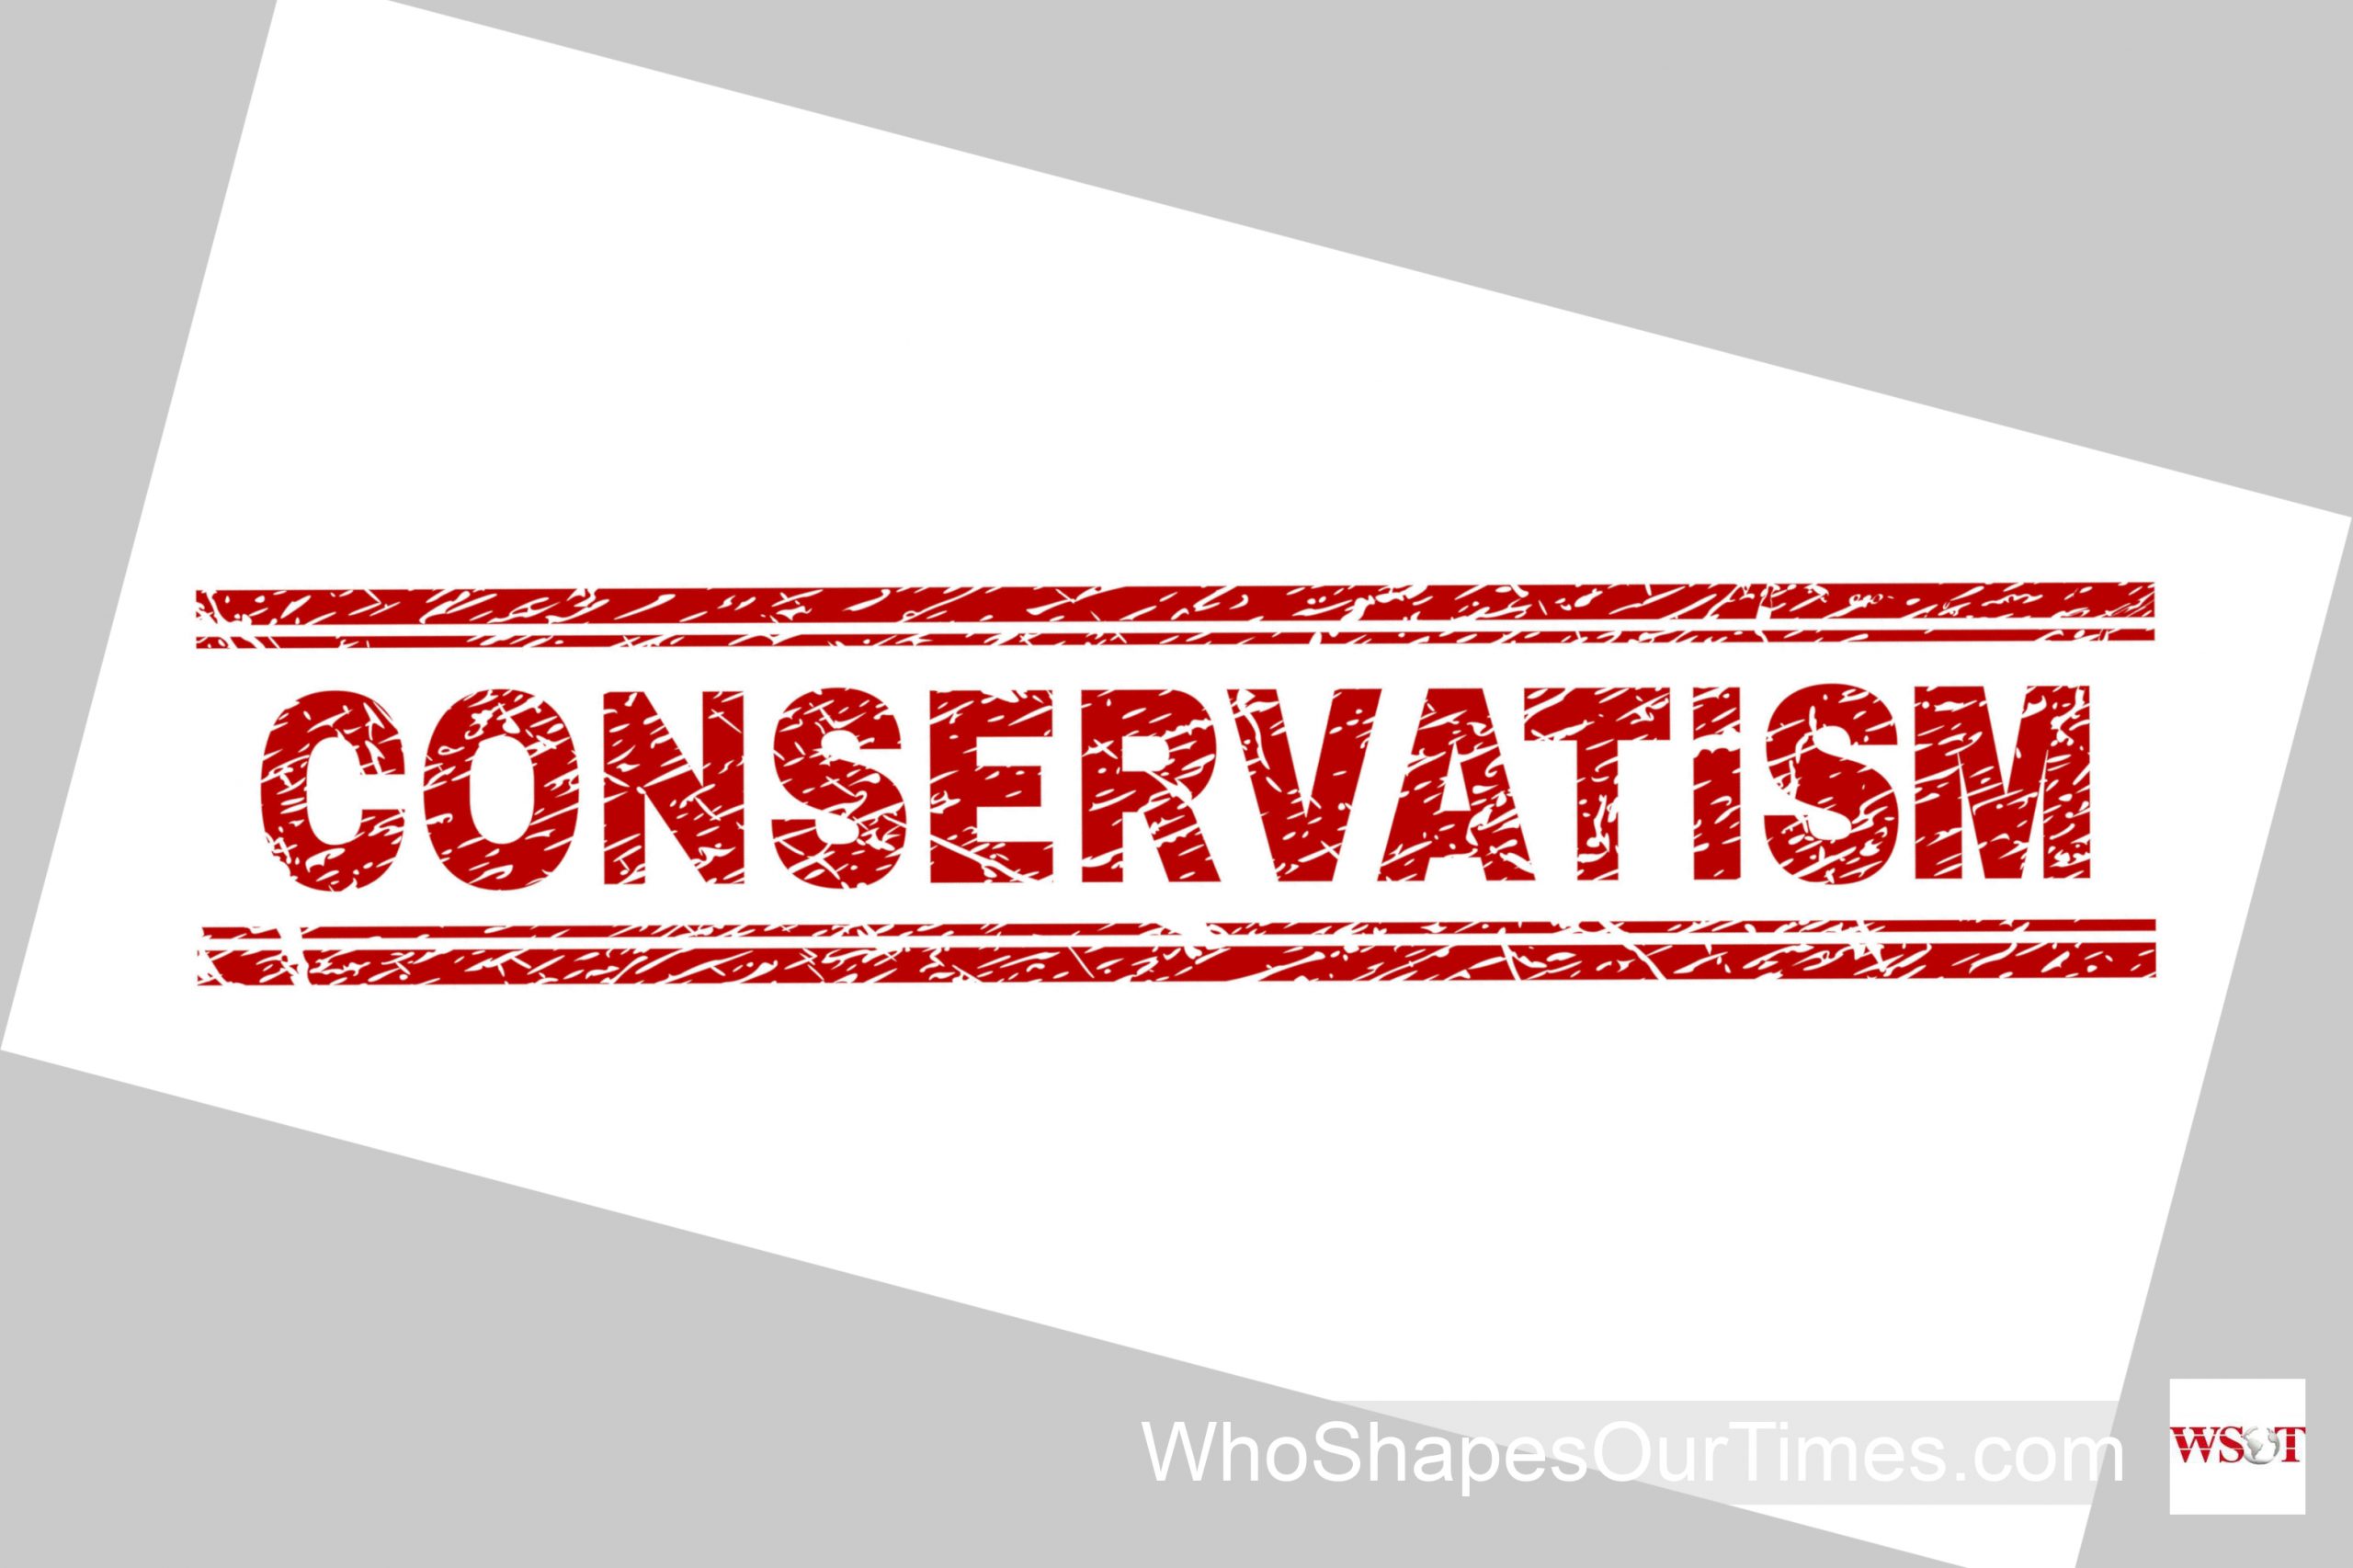 Why We Cannot Afford More Conservatism in 2020 by George Kennedy